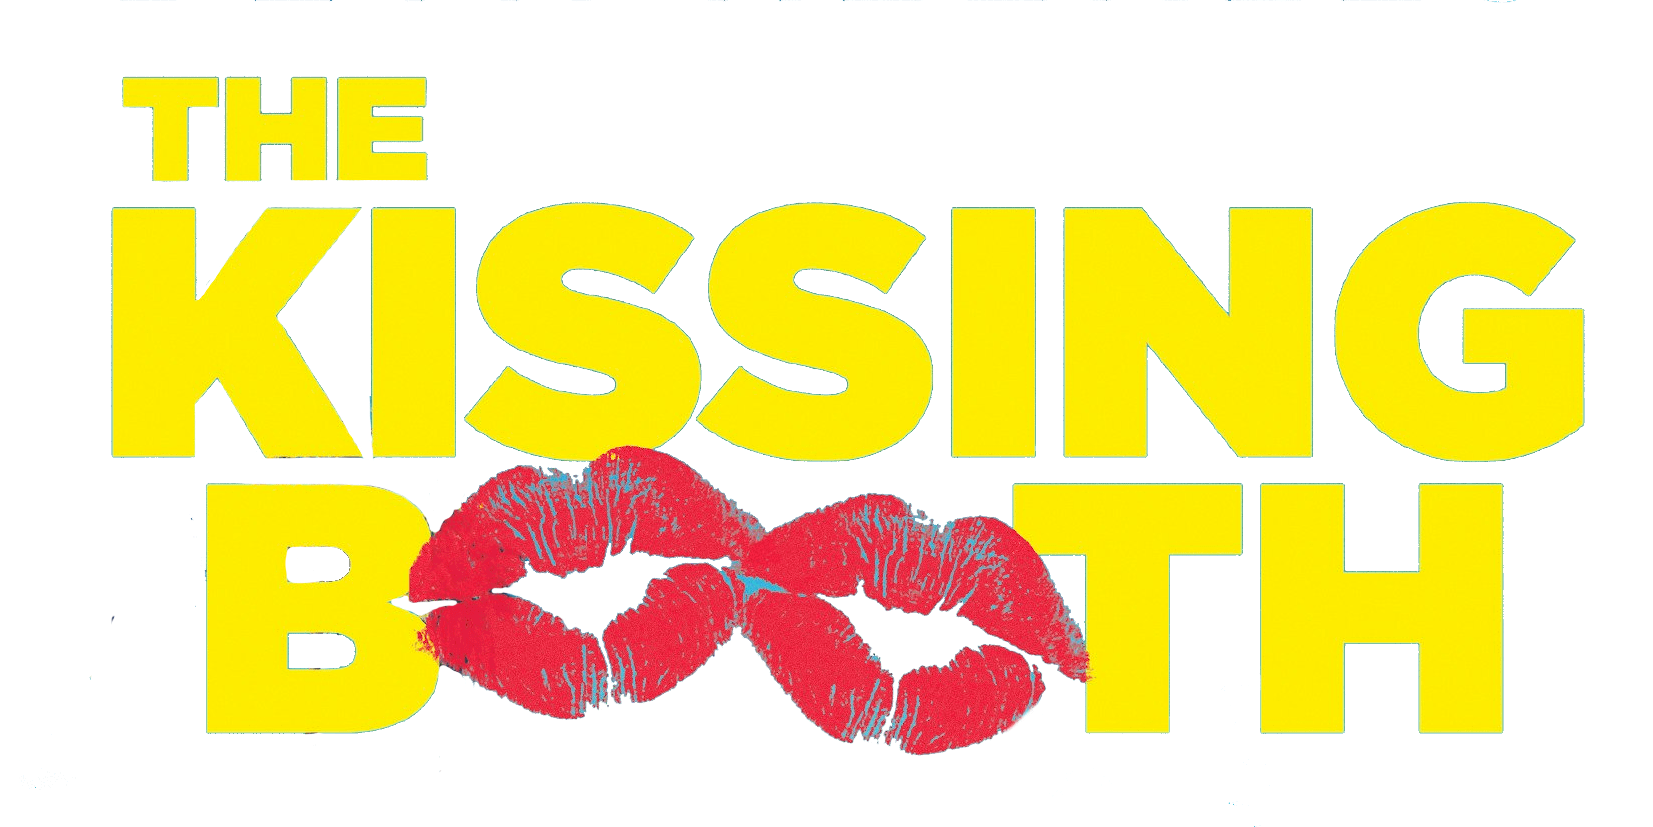 The kiss booth